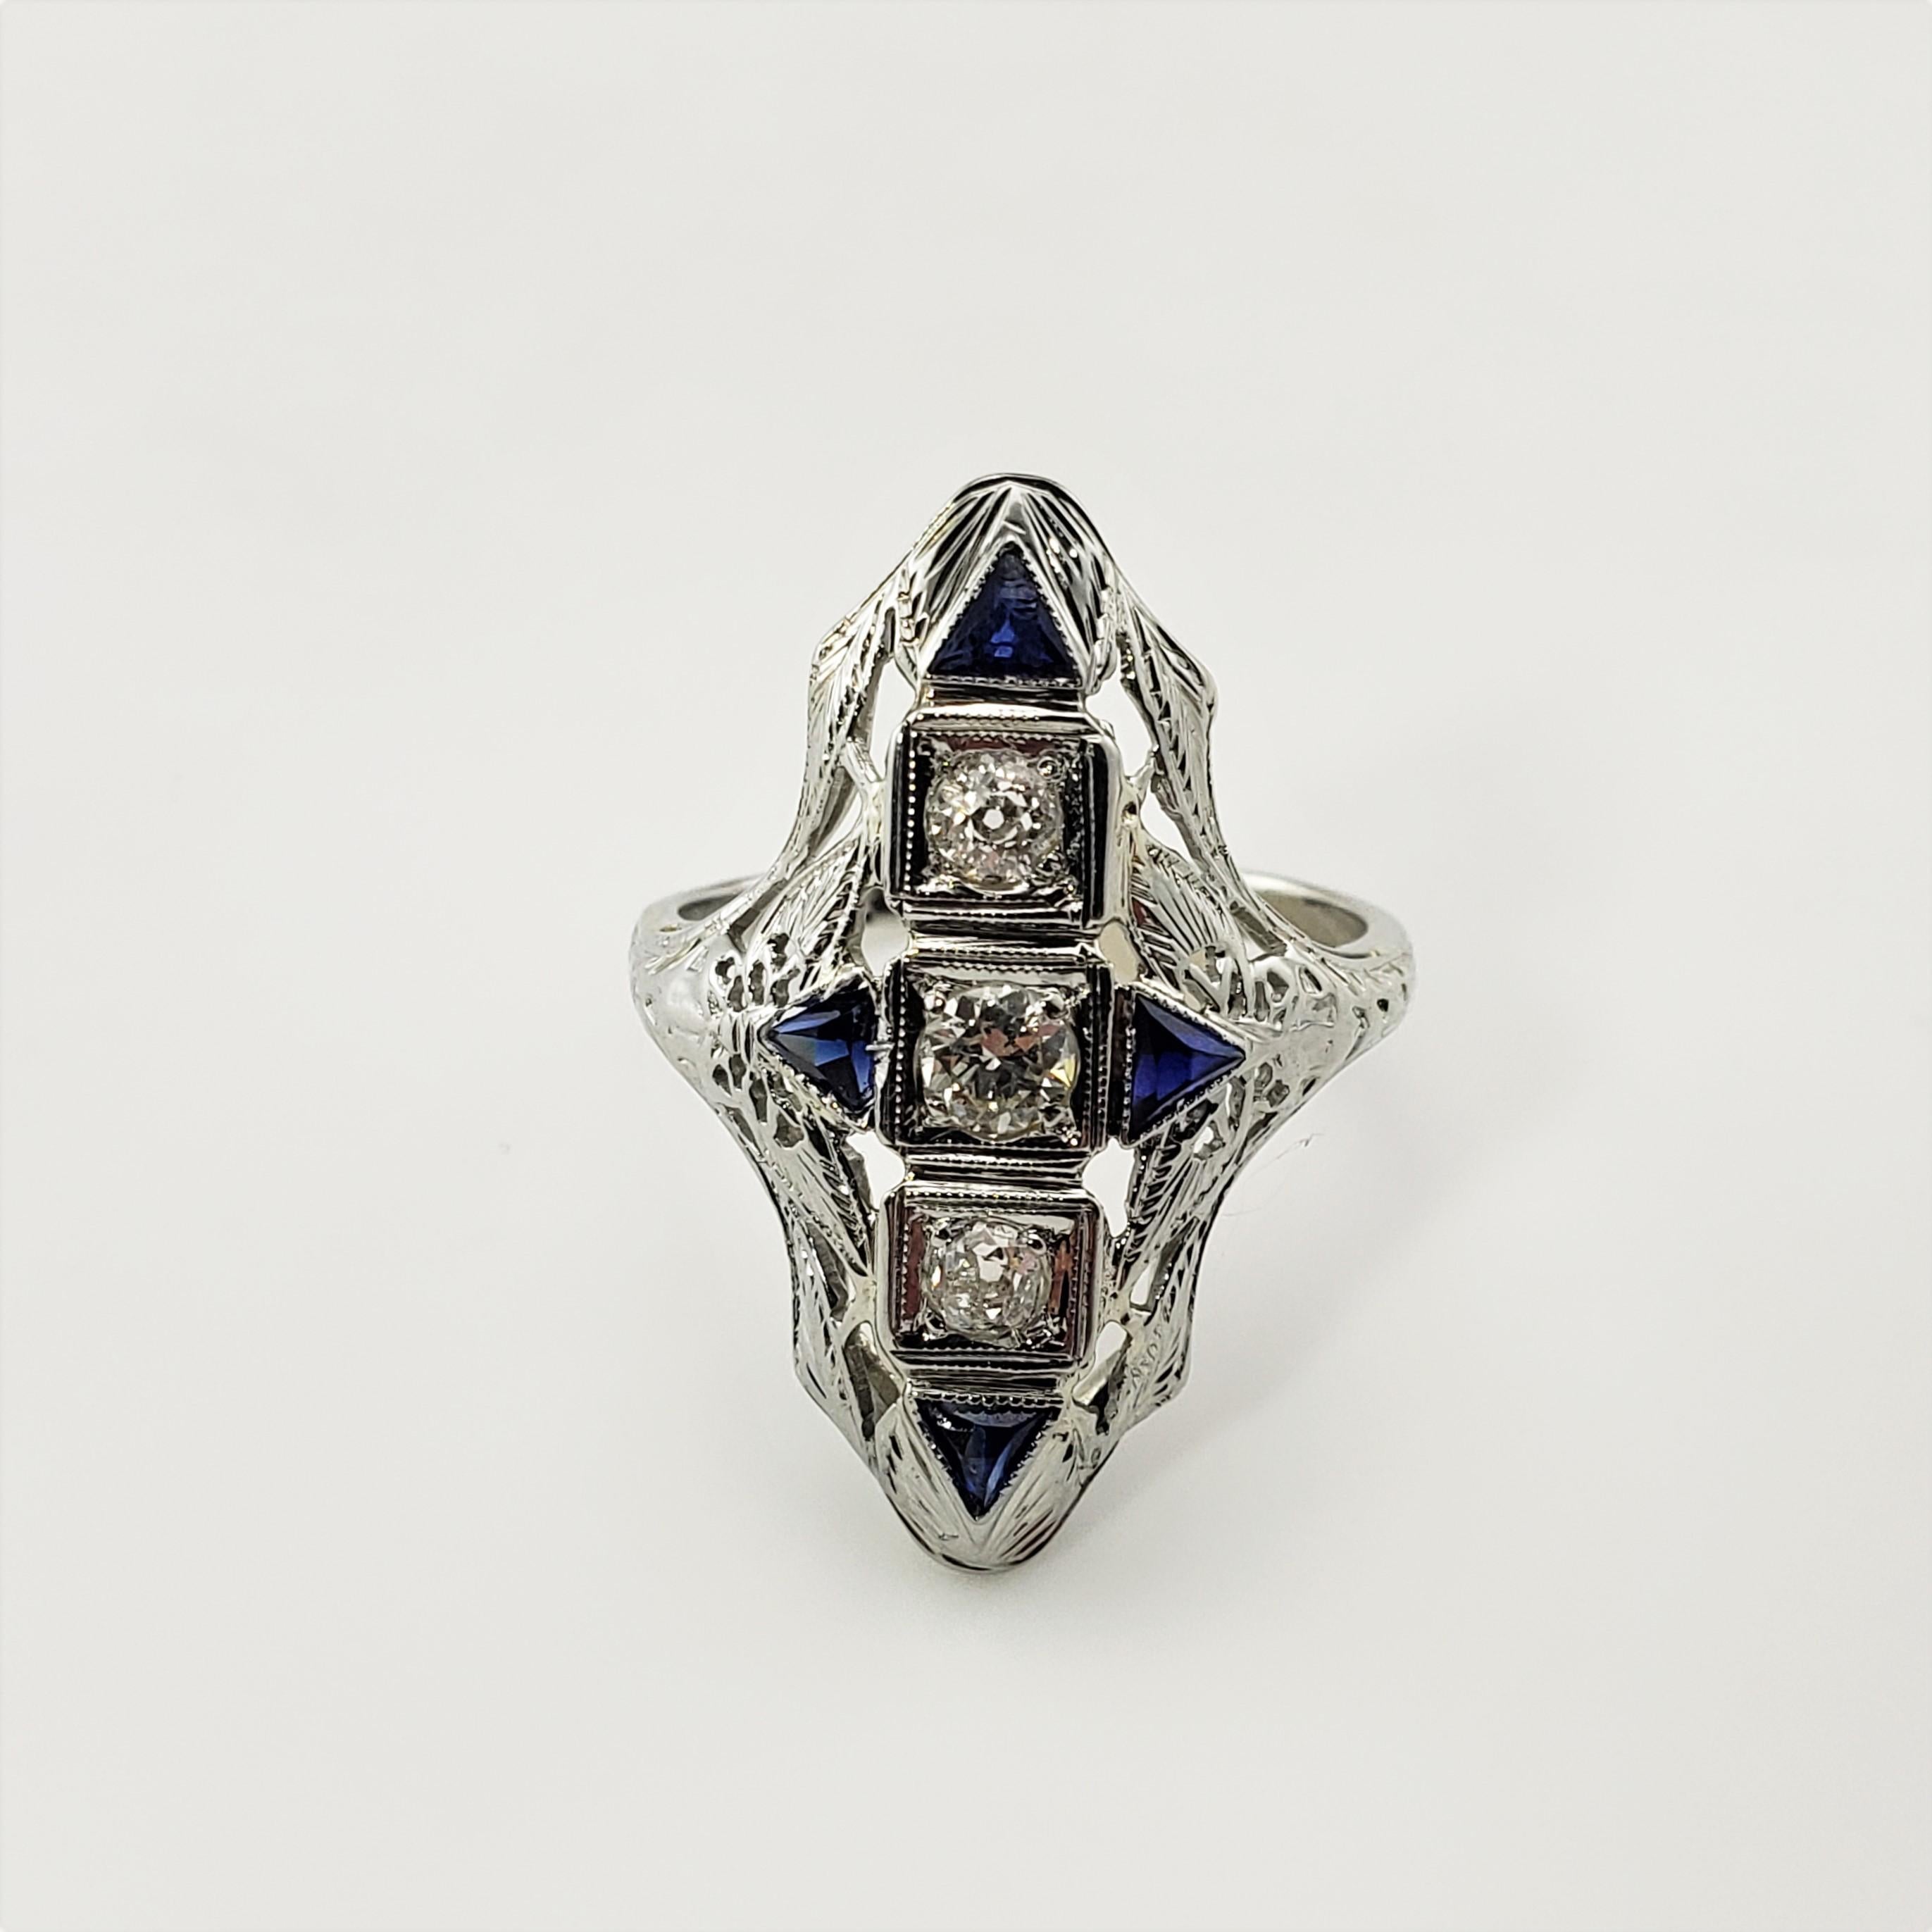 Vintage 14 Karat White Gold Filigree Diamond and Synthetic Sapphire Ring Size 6-

This lovely ring features 1 round brilliant cut diamond (center),  two European cut diamonds* , and two triangle cut synthetic sapphires set in beautifully detailed